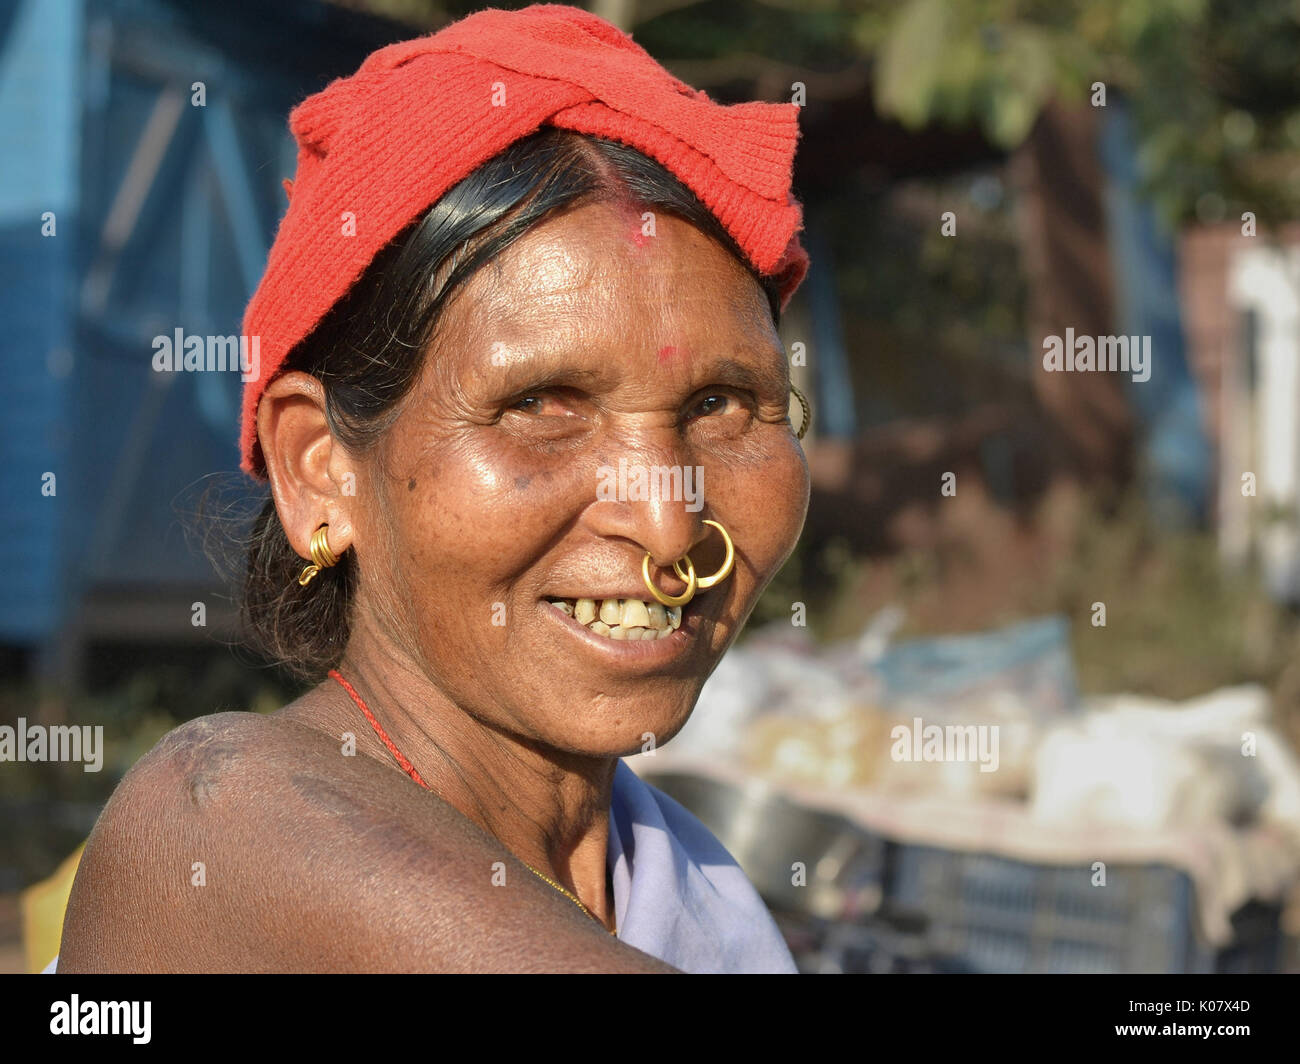 Elderly Indian Adivasi woman with two golden nose rings and distinctive tribal earrings smiles for the camera. Stock Photo